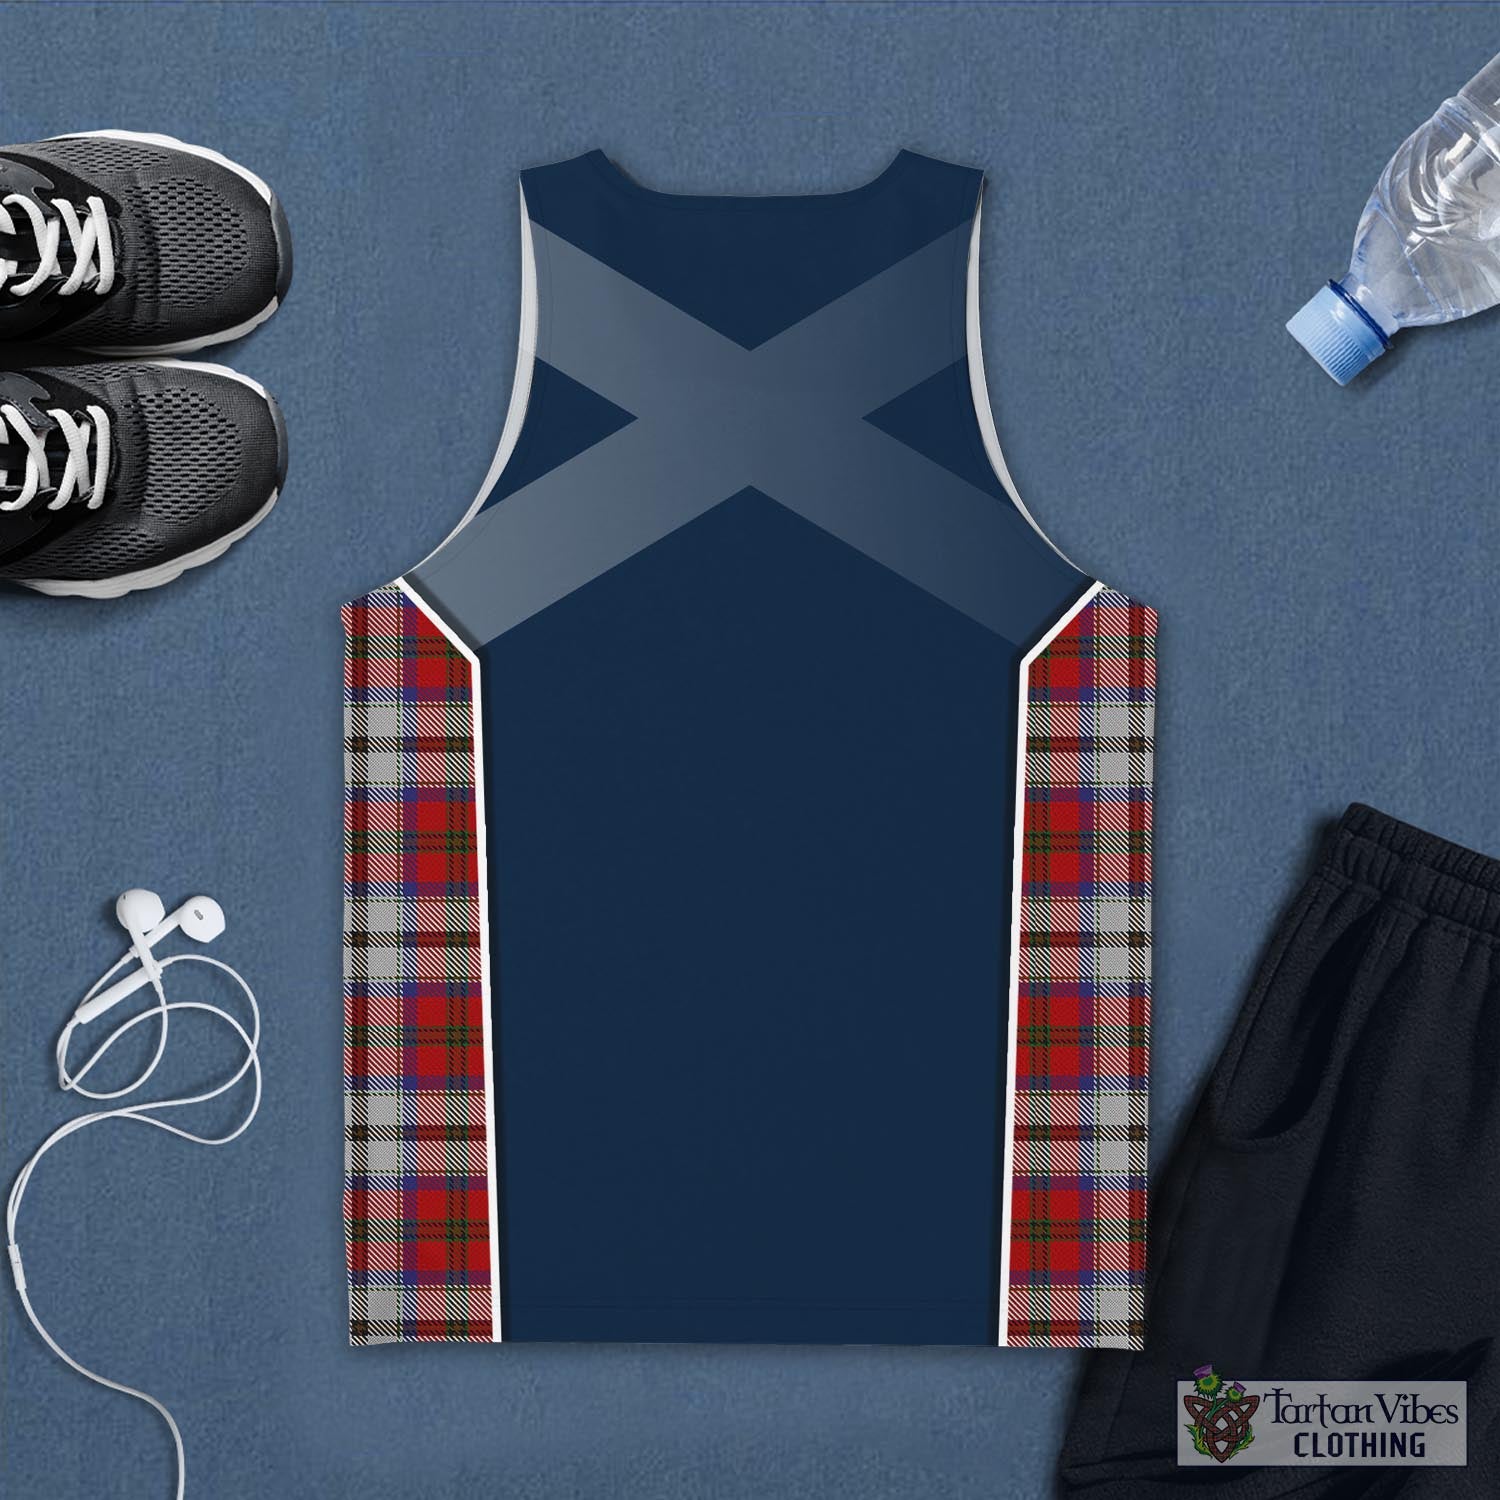 Tartan Vibes Clothing MacCulloch Dress Tartan Men's Tanks Top with Family Crest and Scottish Thistle Vibes Sport Style